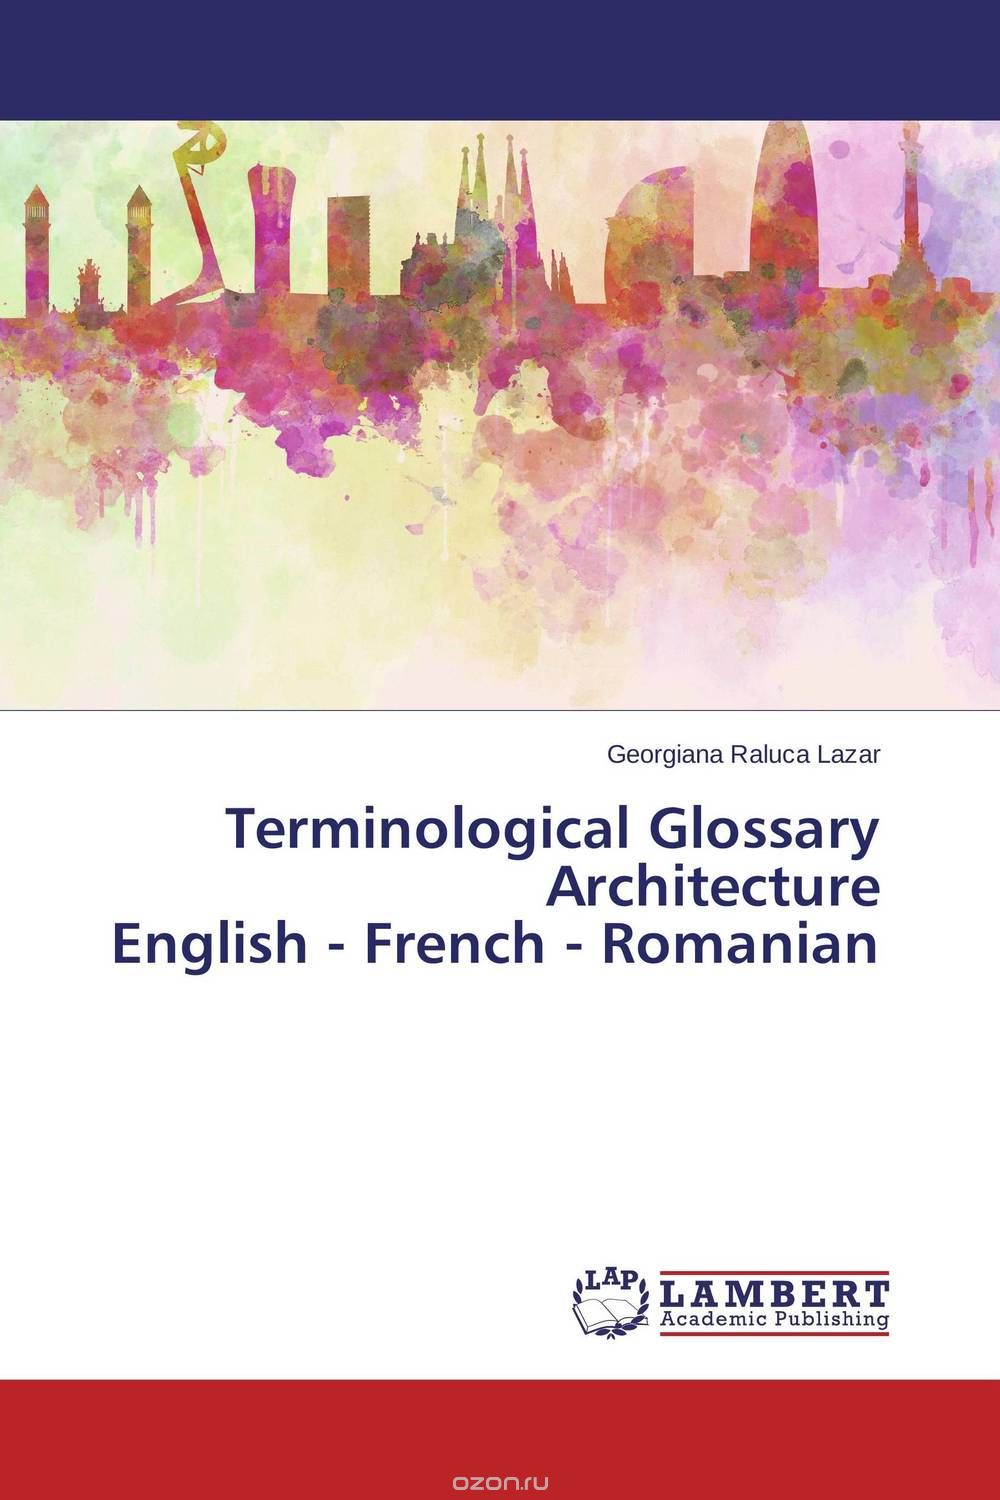 Terminological Glossary Architecture English - French - Romanian